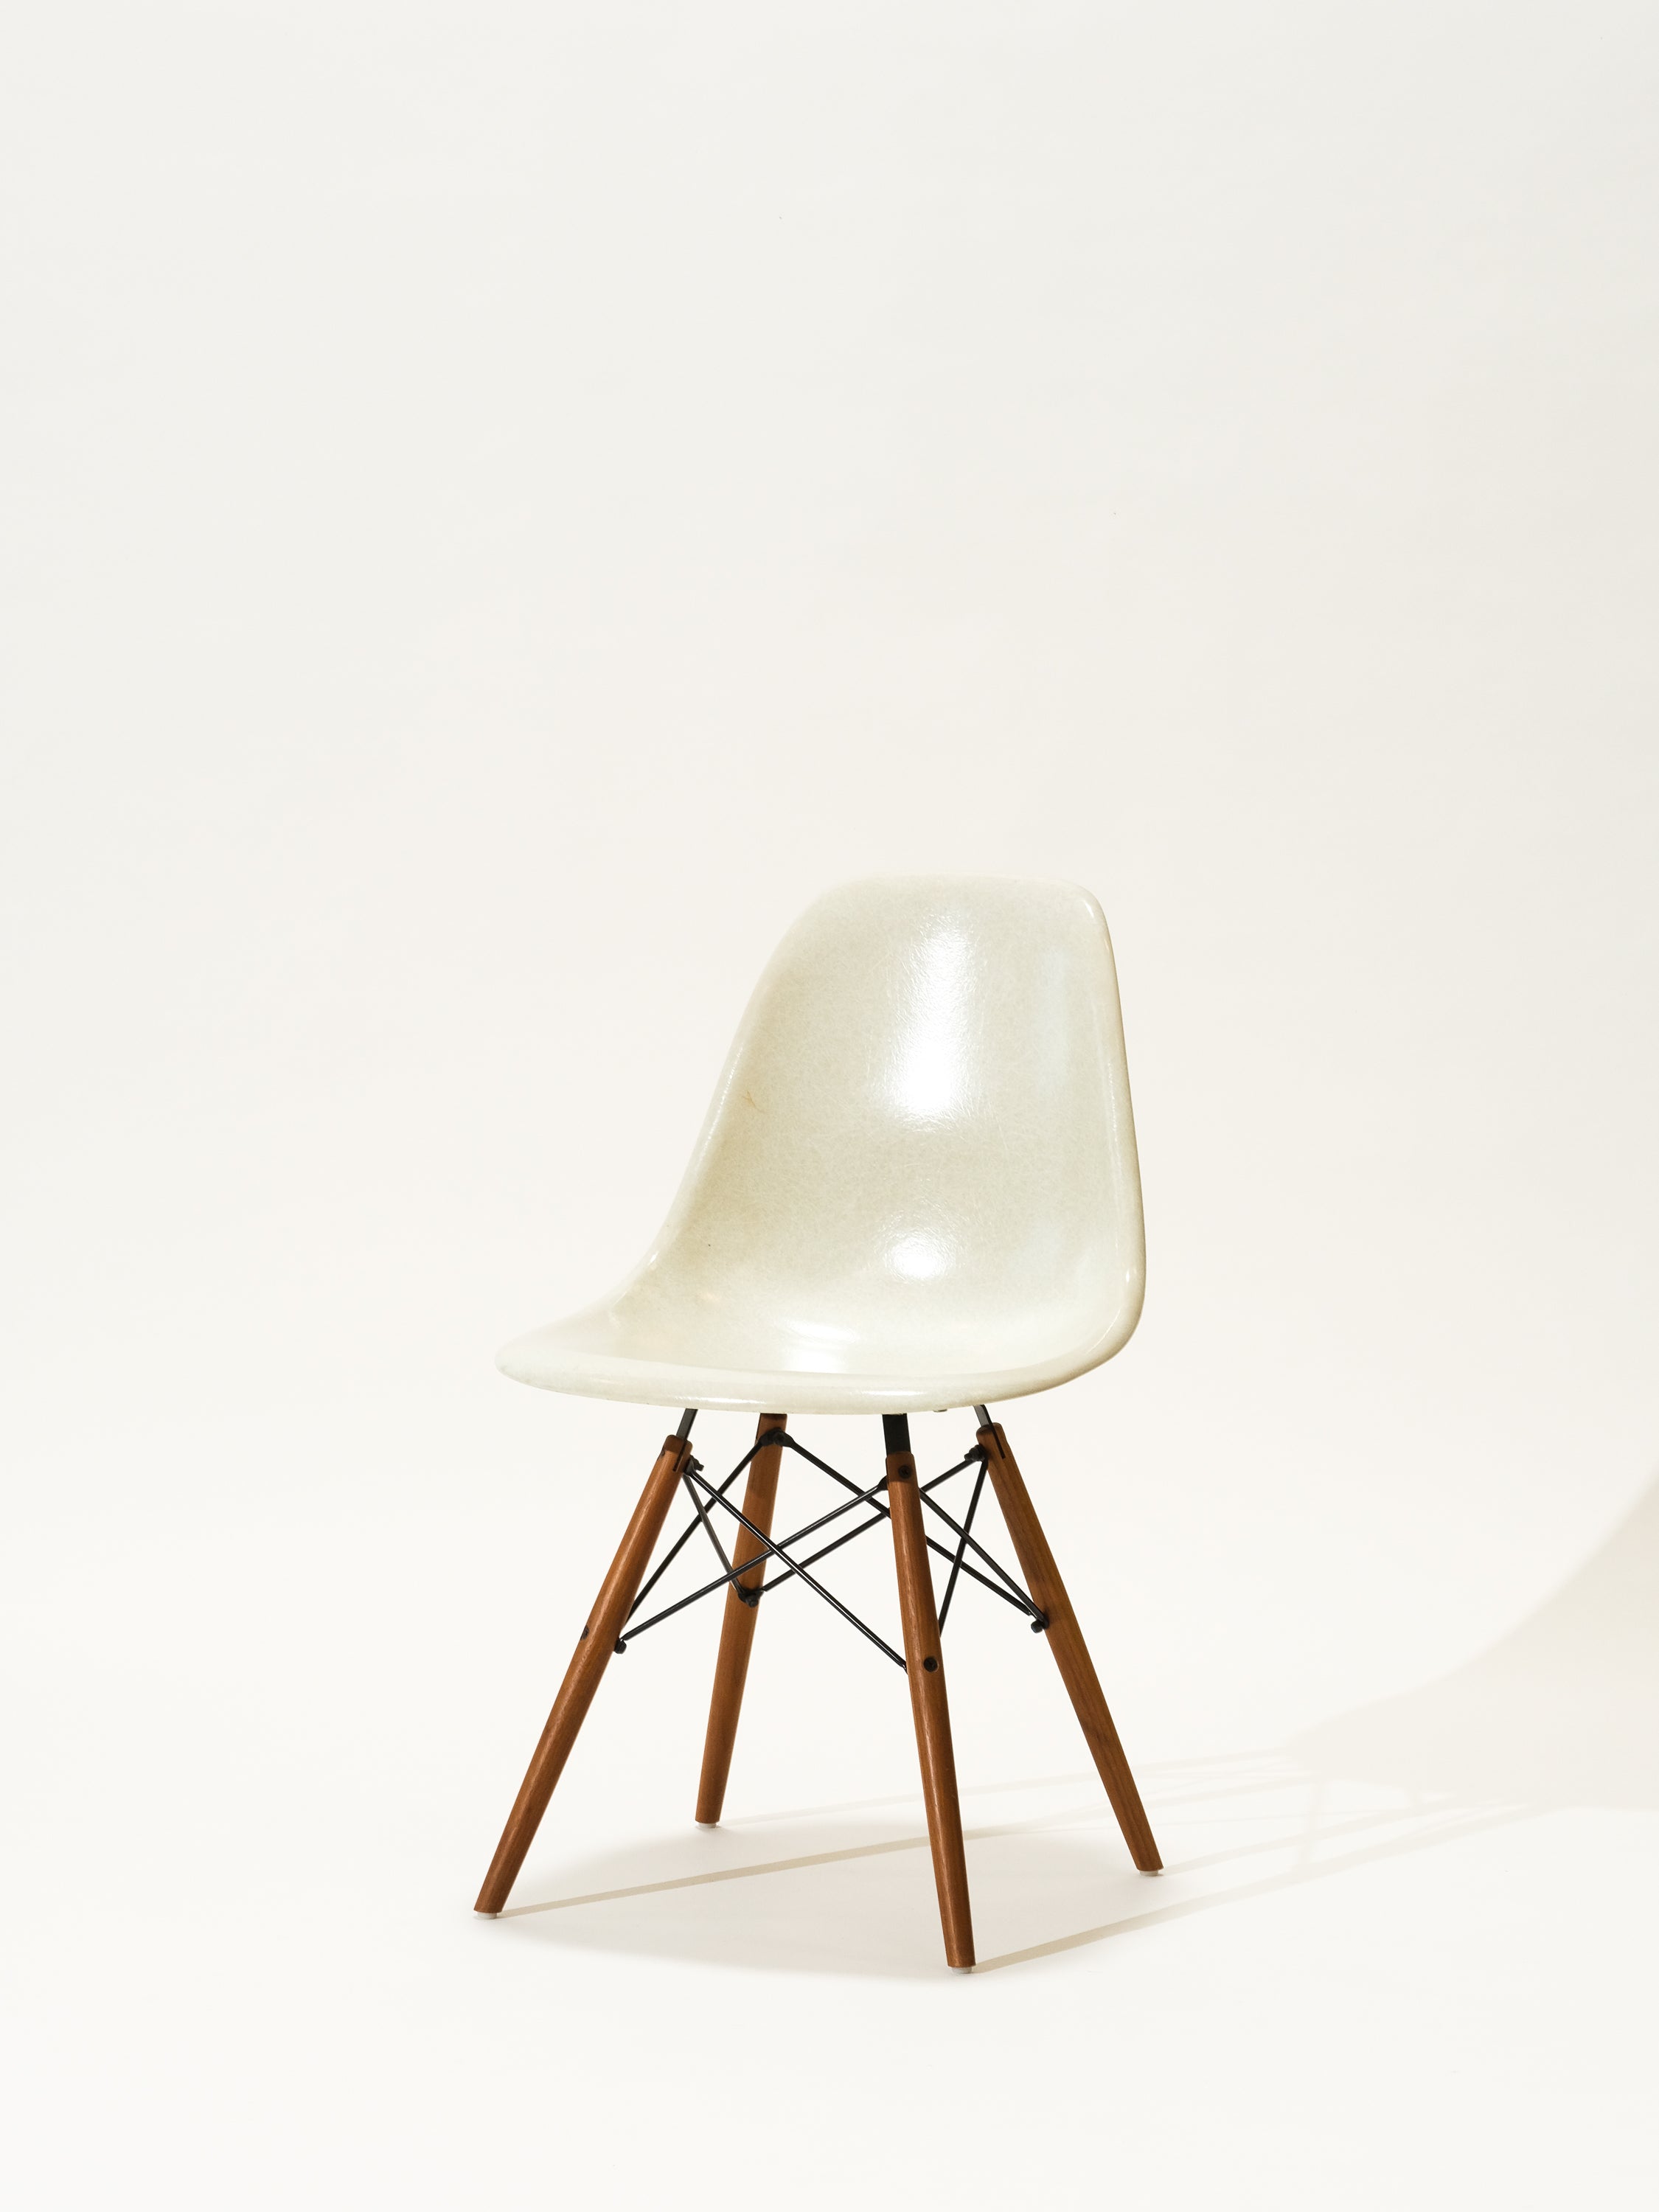 Original DSW Fiberglass Side Chair by Charles & Ray Eames for Herman Miller